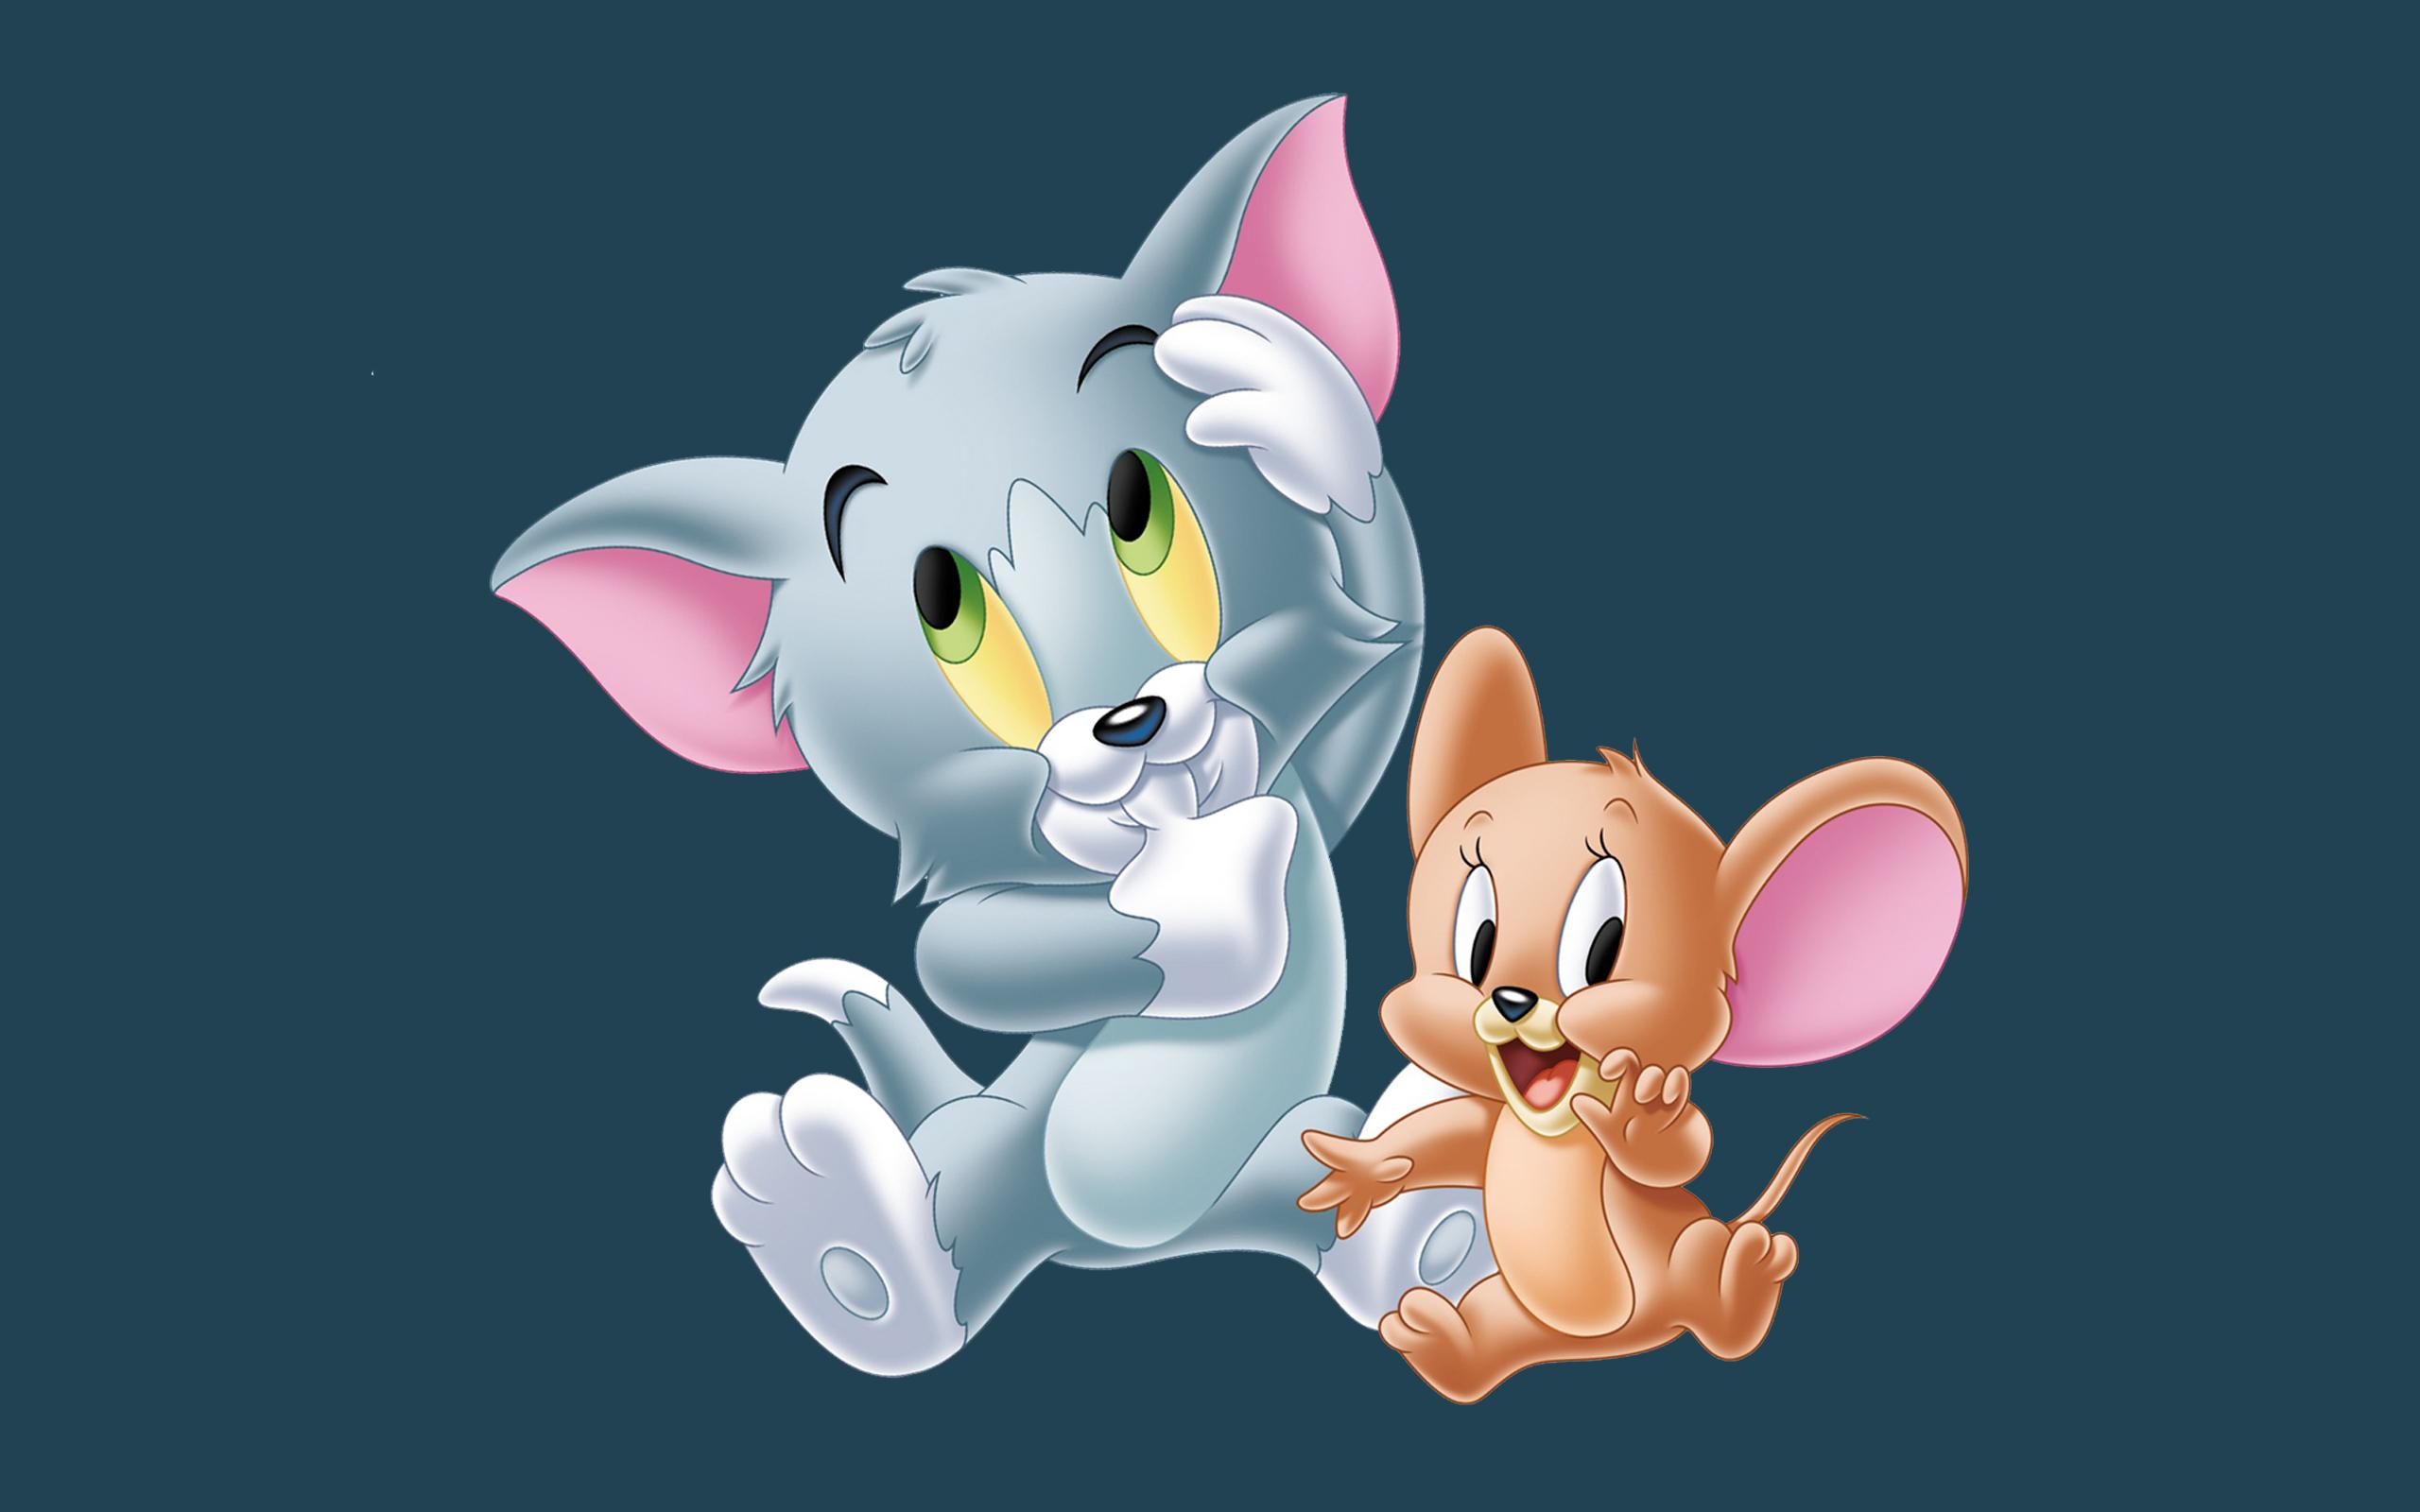 Tom And Jerry As Small Babies Desktop HD Wallpaper For Mobile